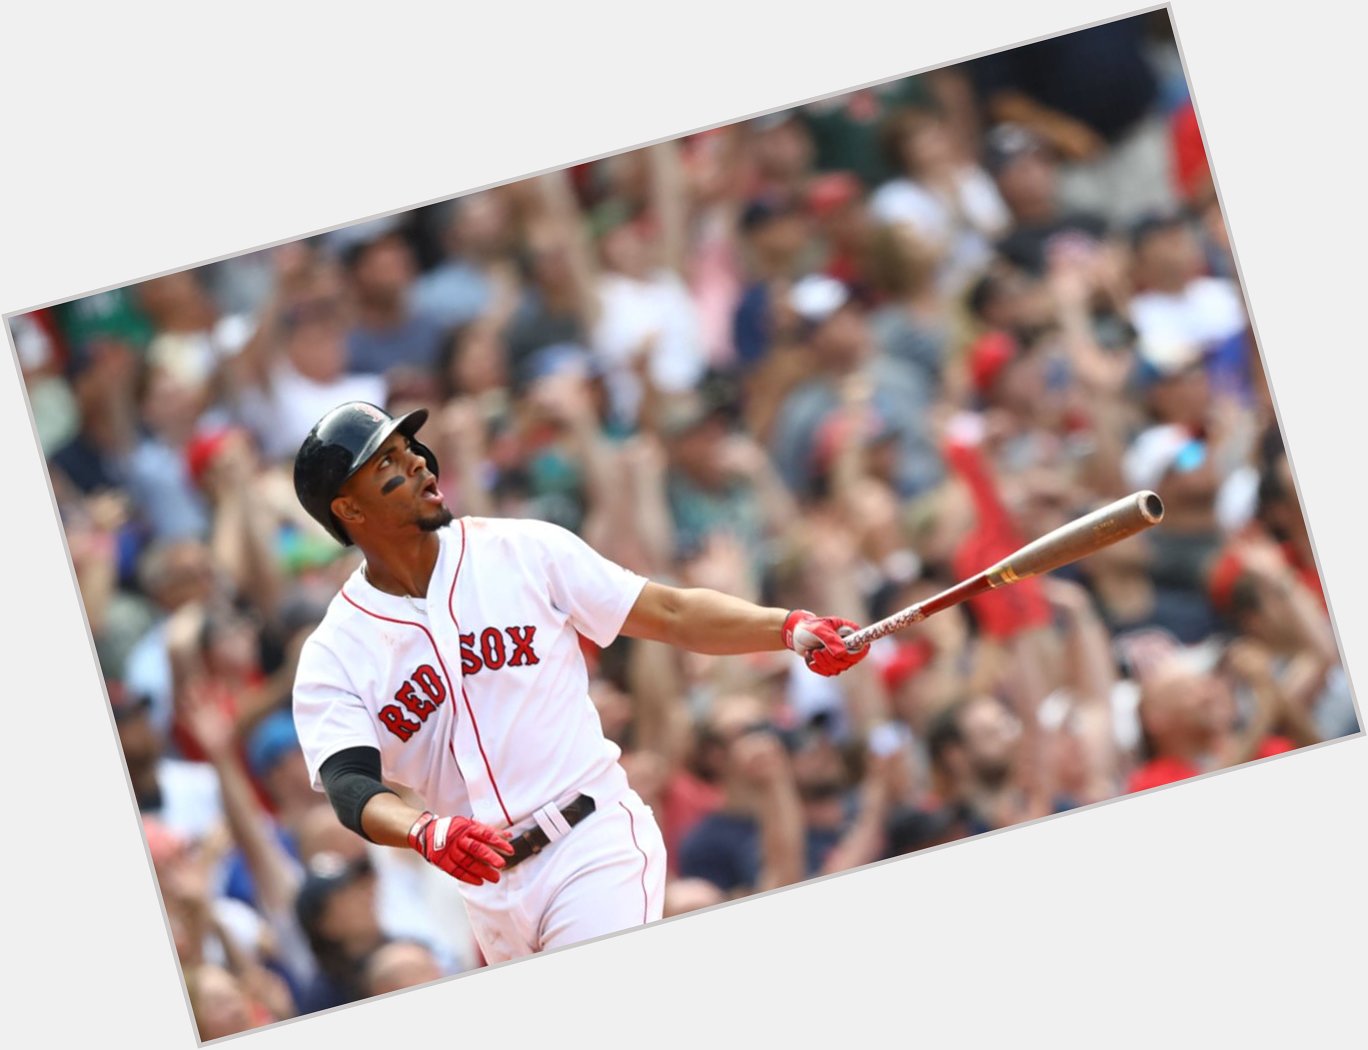 Happy 28th bday Xander Bogaerts! Has a .907 OPS over the last 3 seasons, if you count this year as a season... 